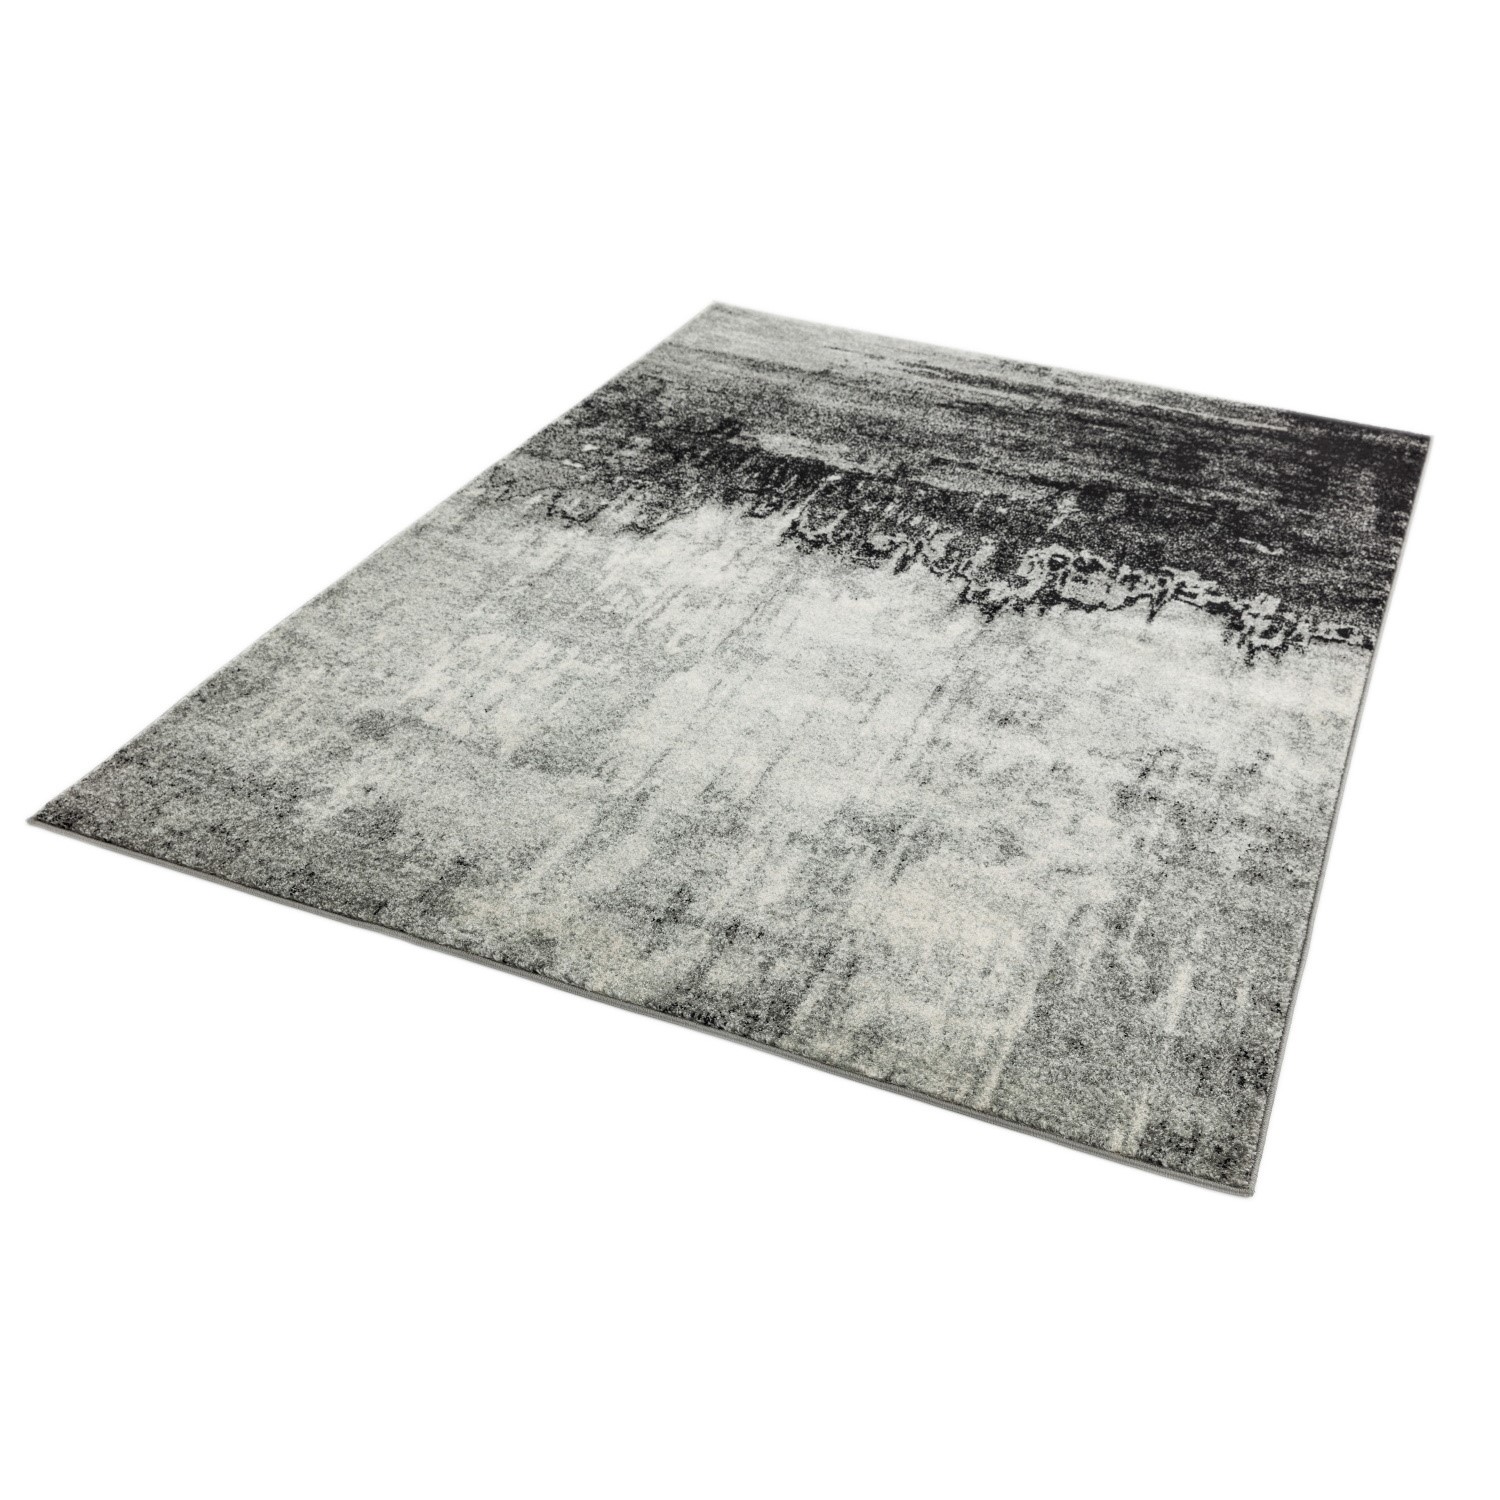 Read more about Large grey rug 200x290cm nova